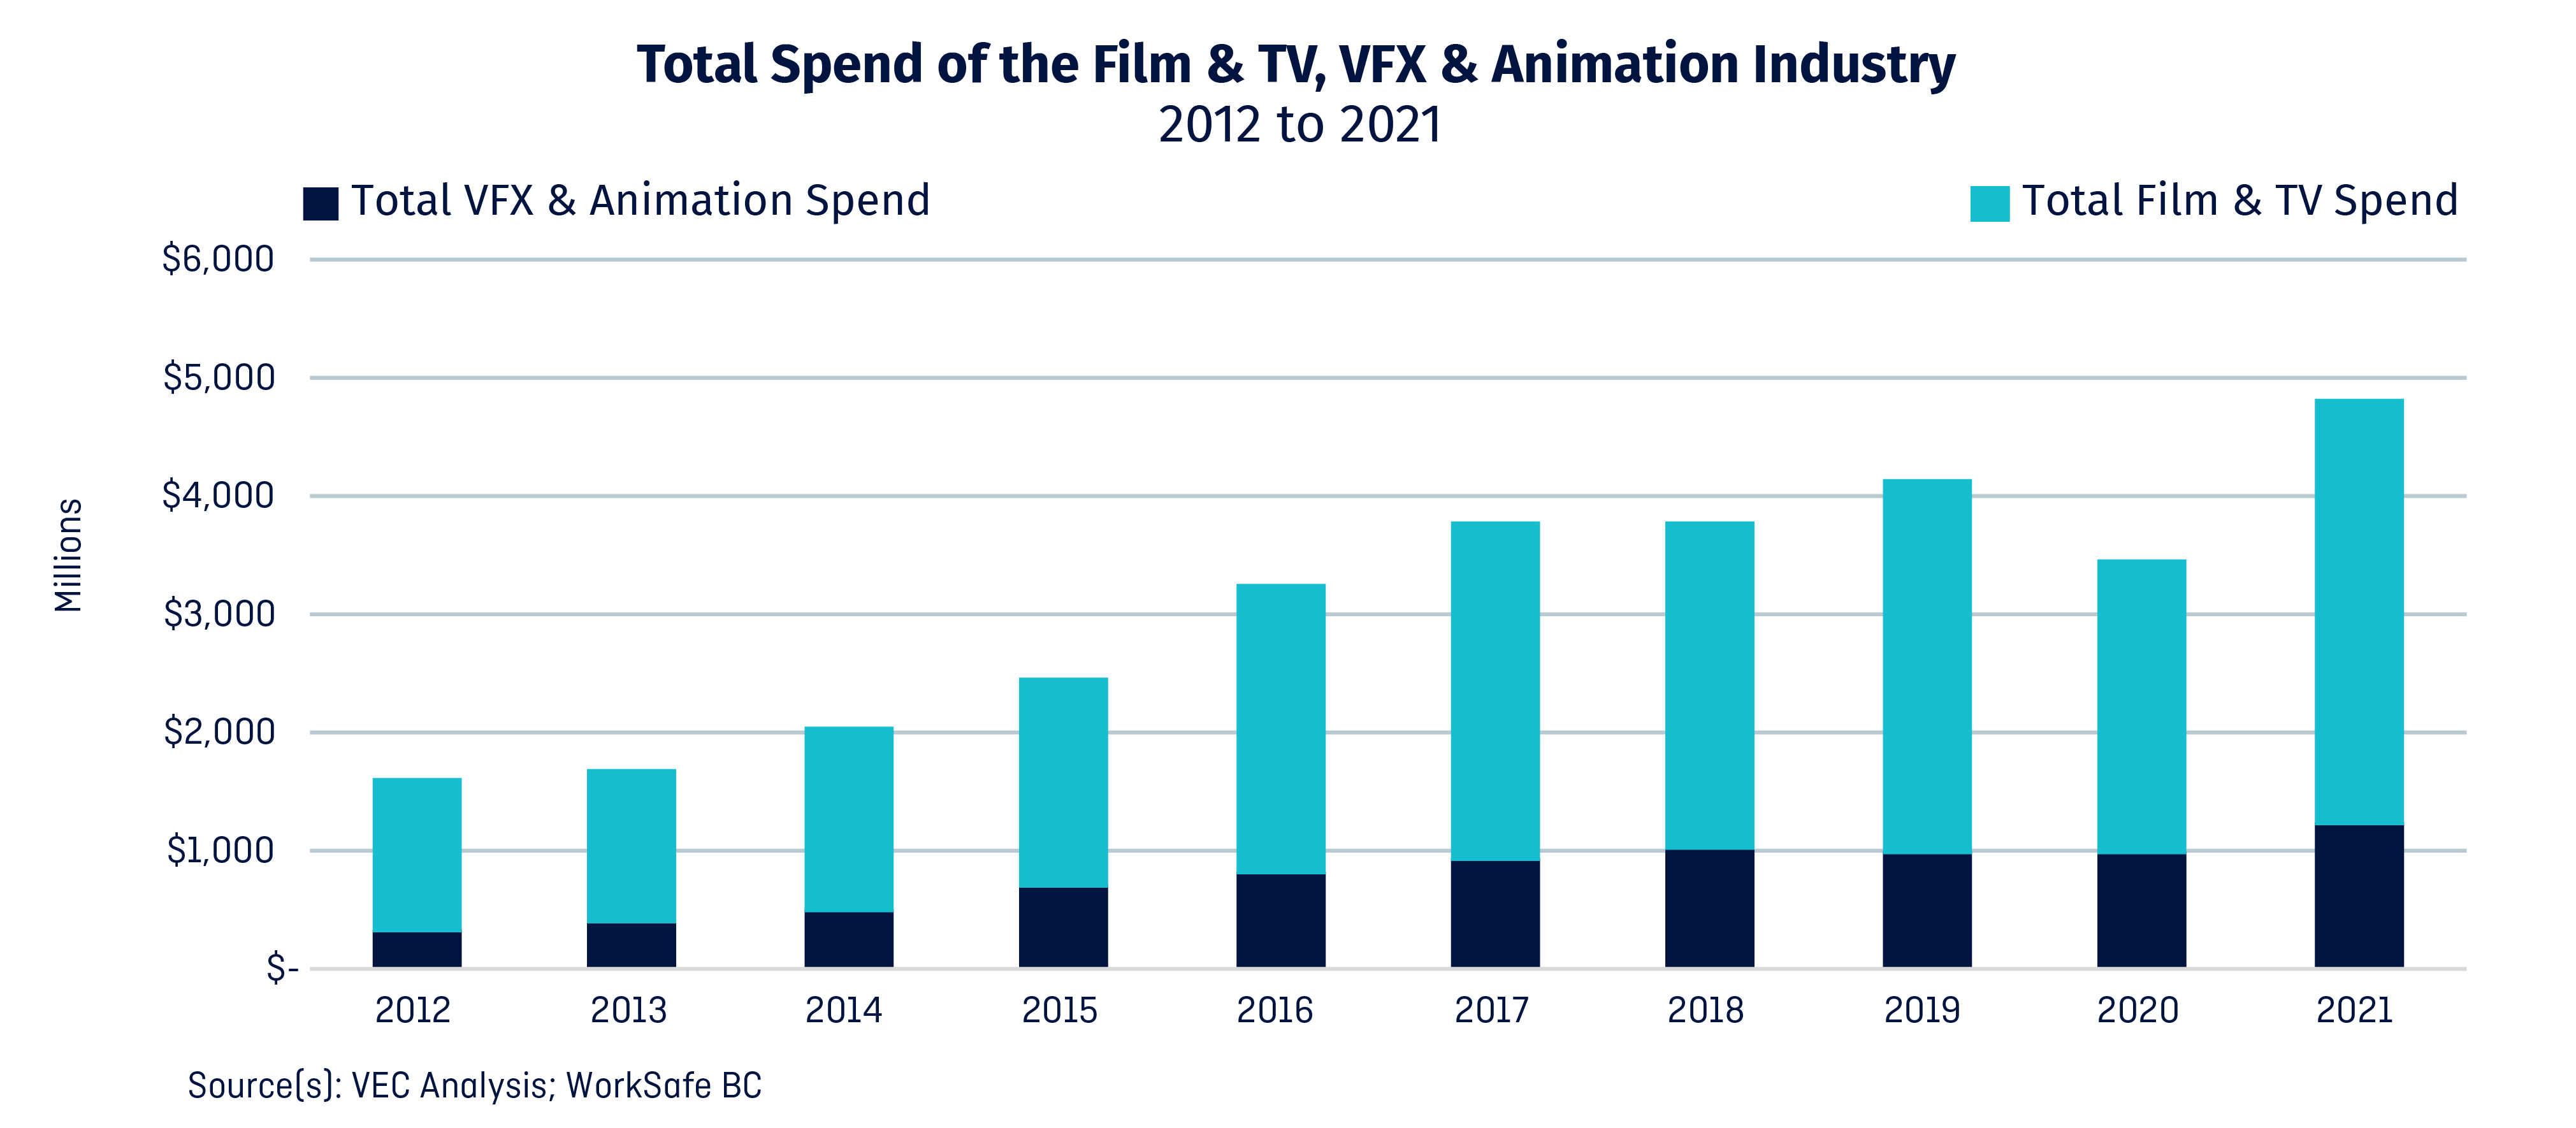 Total Spend of the Film & TV, VFX & Animation Industry, 2012 to 2021. Source: Vancouver Economic Commission